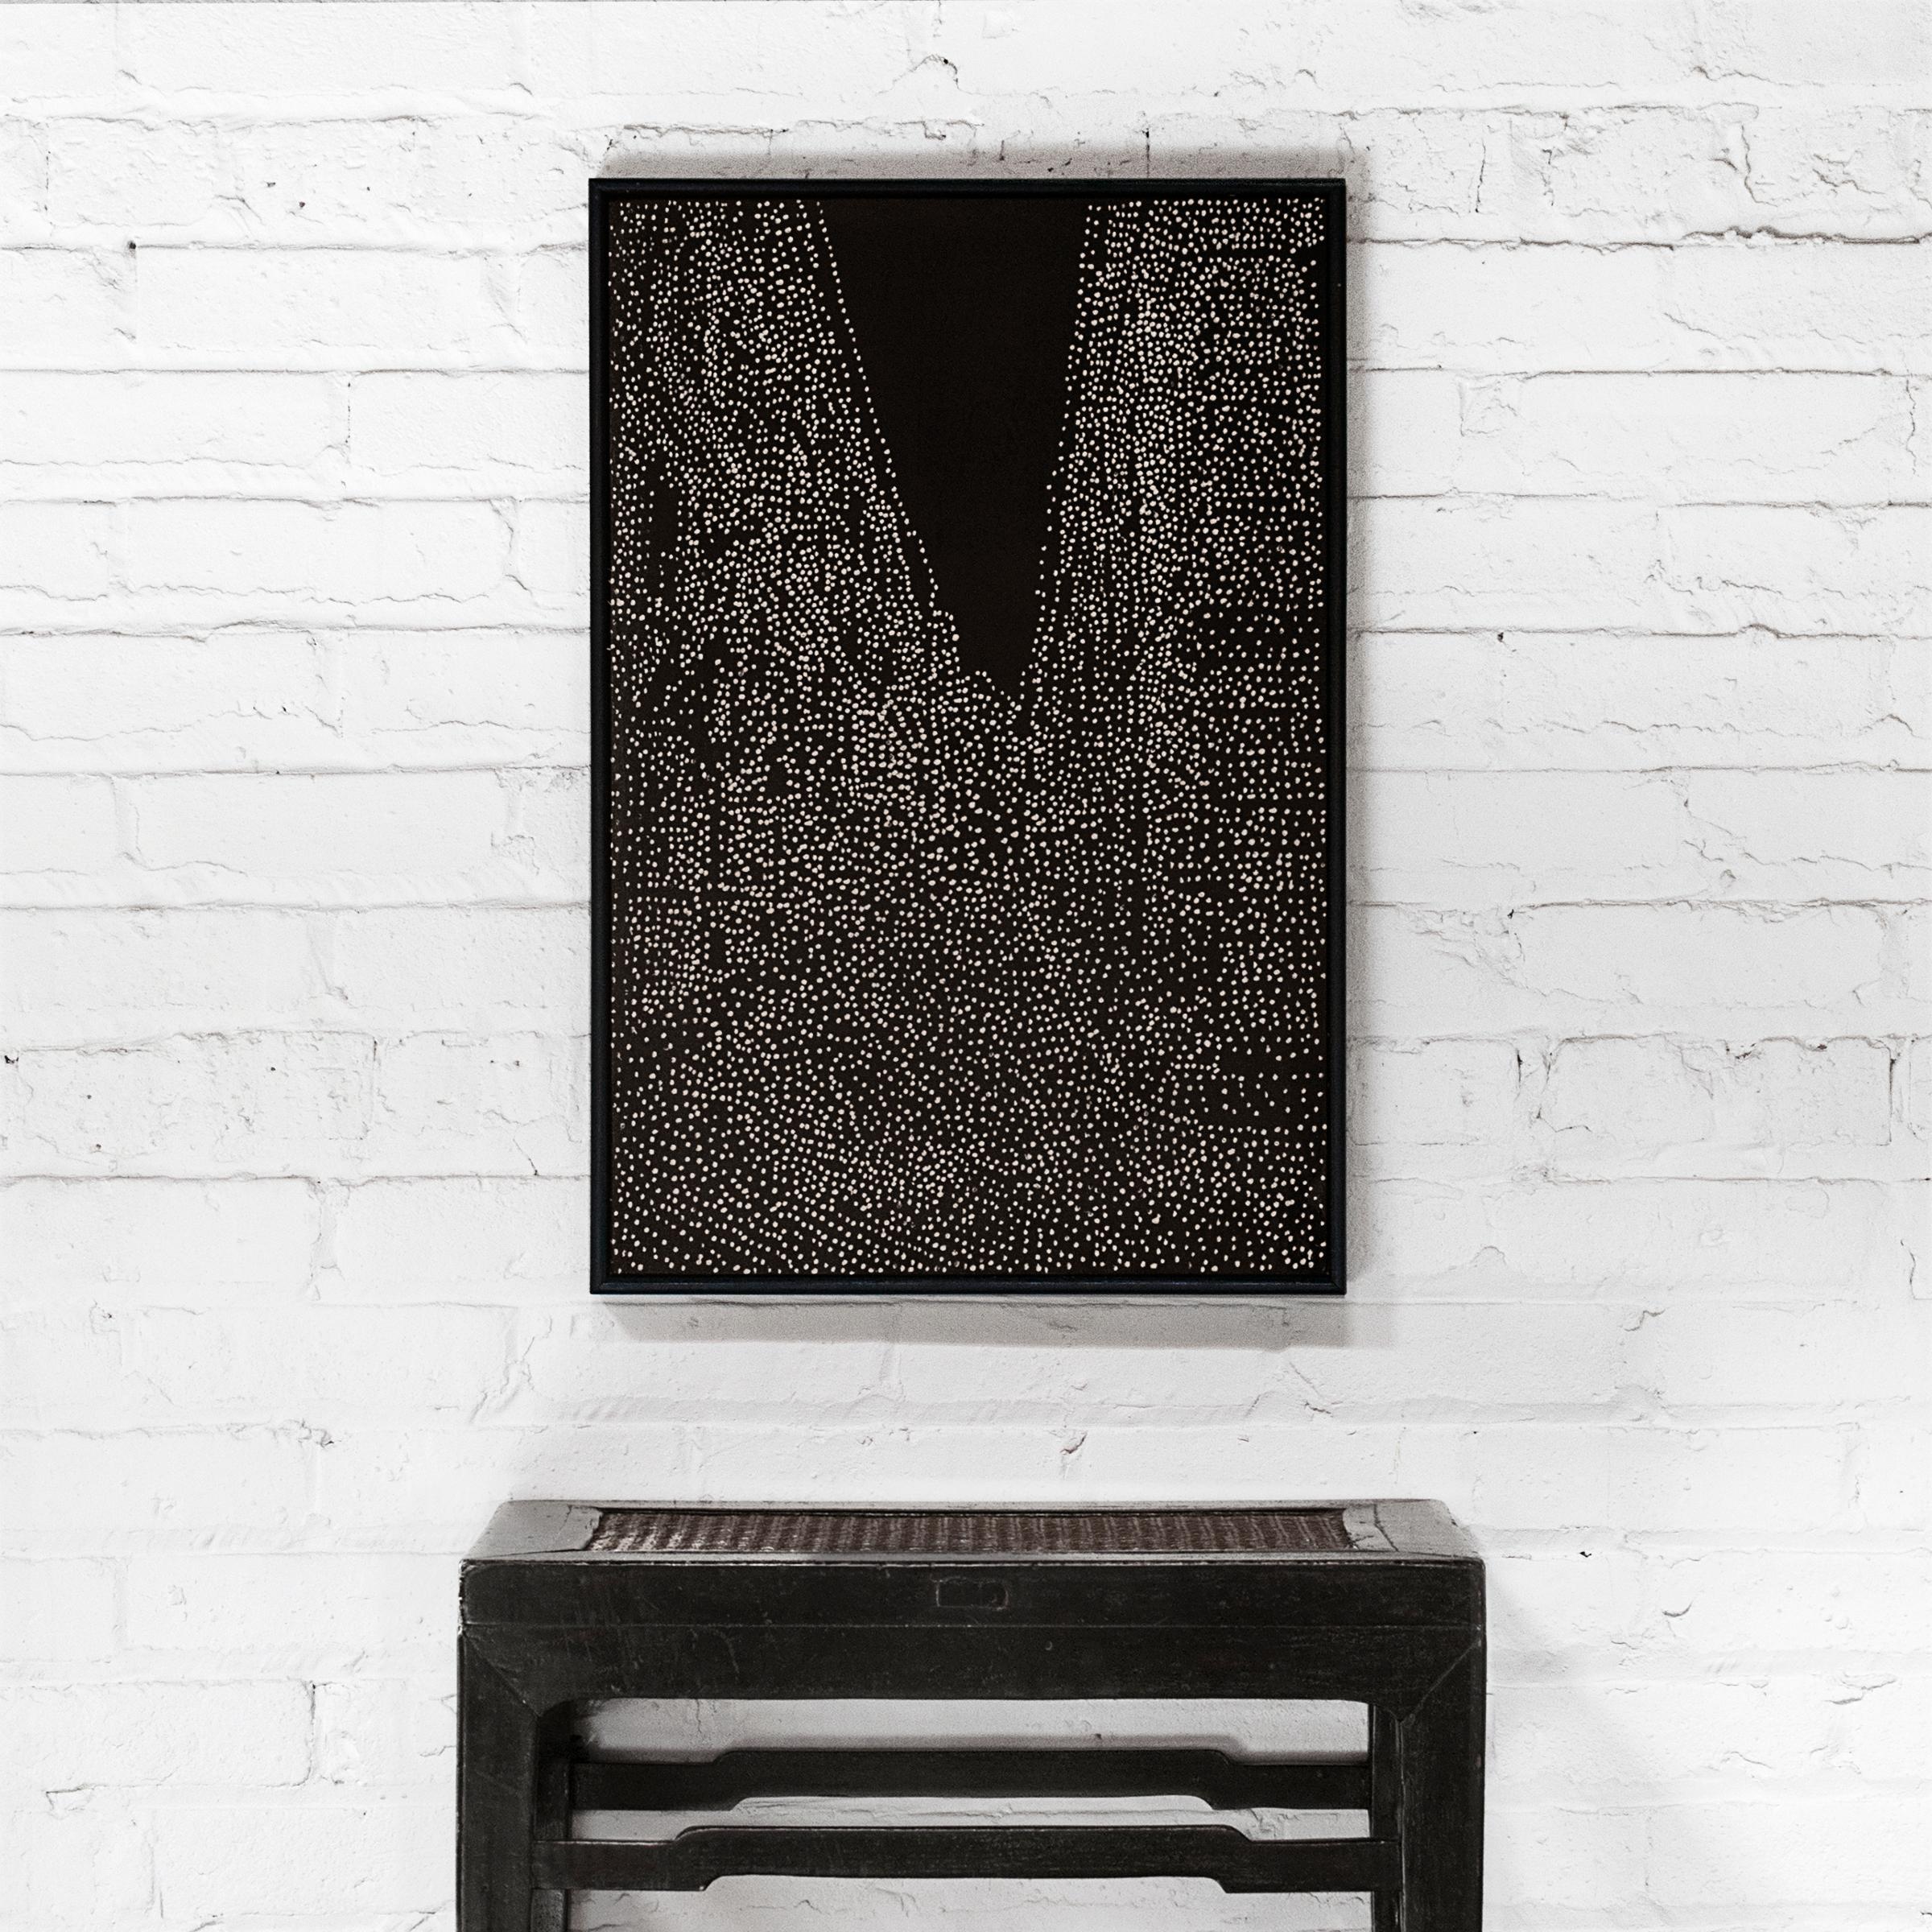 This painting, like most of Ren Hui’s exquisite artworks, celebrates his subjects using a style that he calls “uncomplicated and honest.” The beautiful pattern of white carved out of a painted black background, is called 